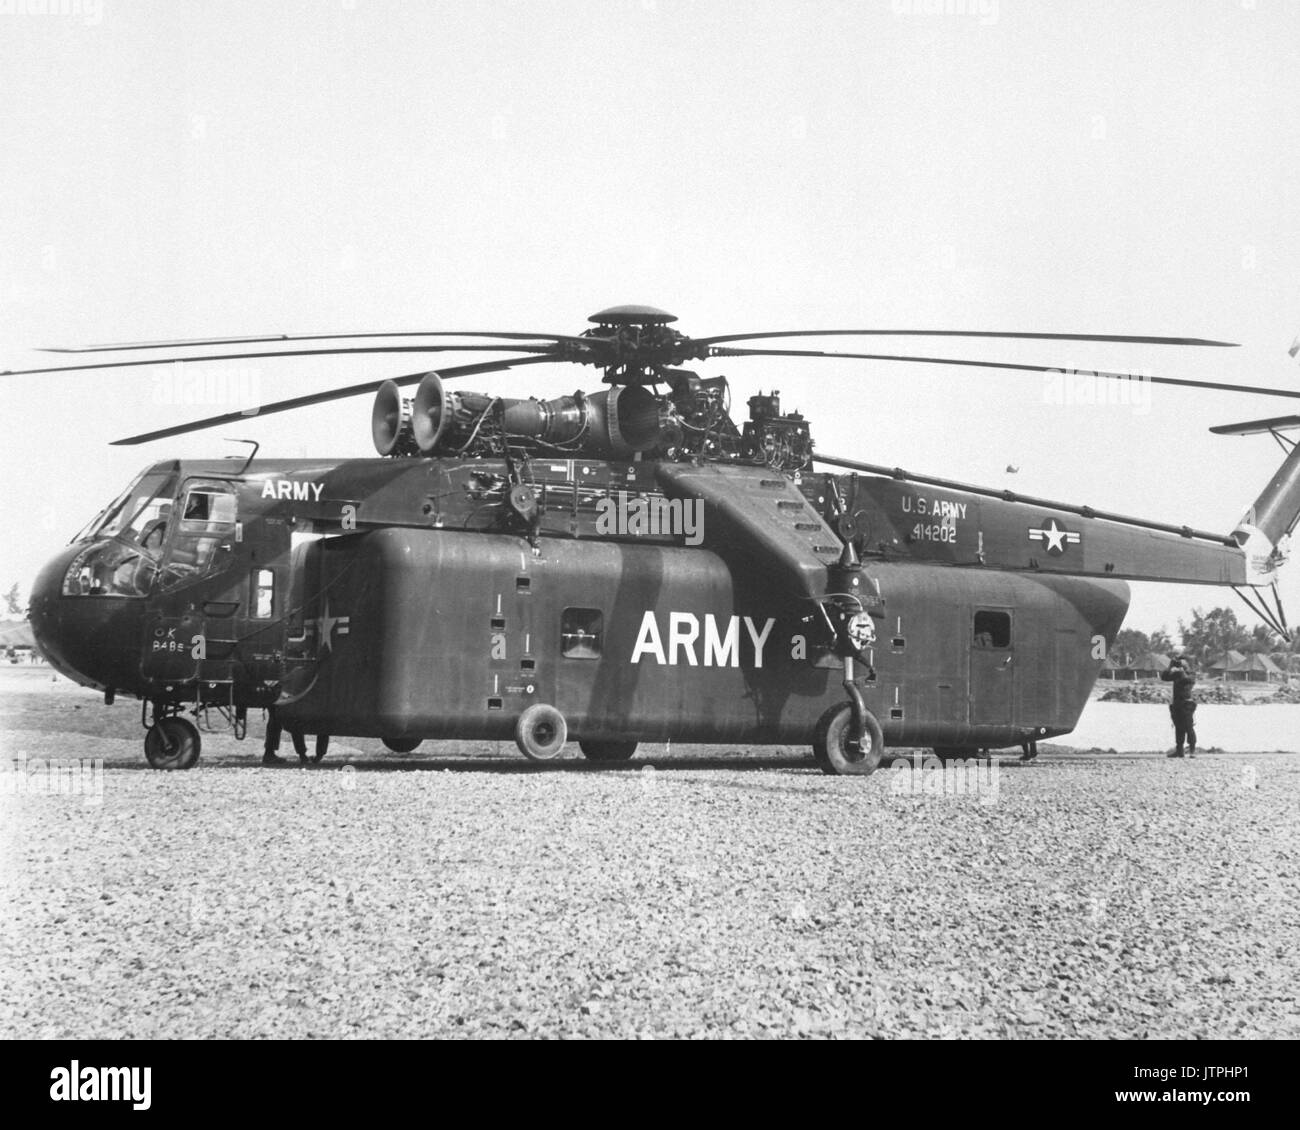 One of the unique pieces of equipment brought to Vietnam by the 1st Cavalry Division (Airmobile), U.S. Army, is the huge Sky Crane CH-54A helicopter which can lift tremendous loads. (USIA) EXACT DATE SHOT UNKNOWN NARA FILE #:  306-MVP-15-10 WAR & CONFLICT BOOK #:  400 Stock Photo